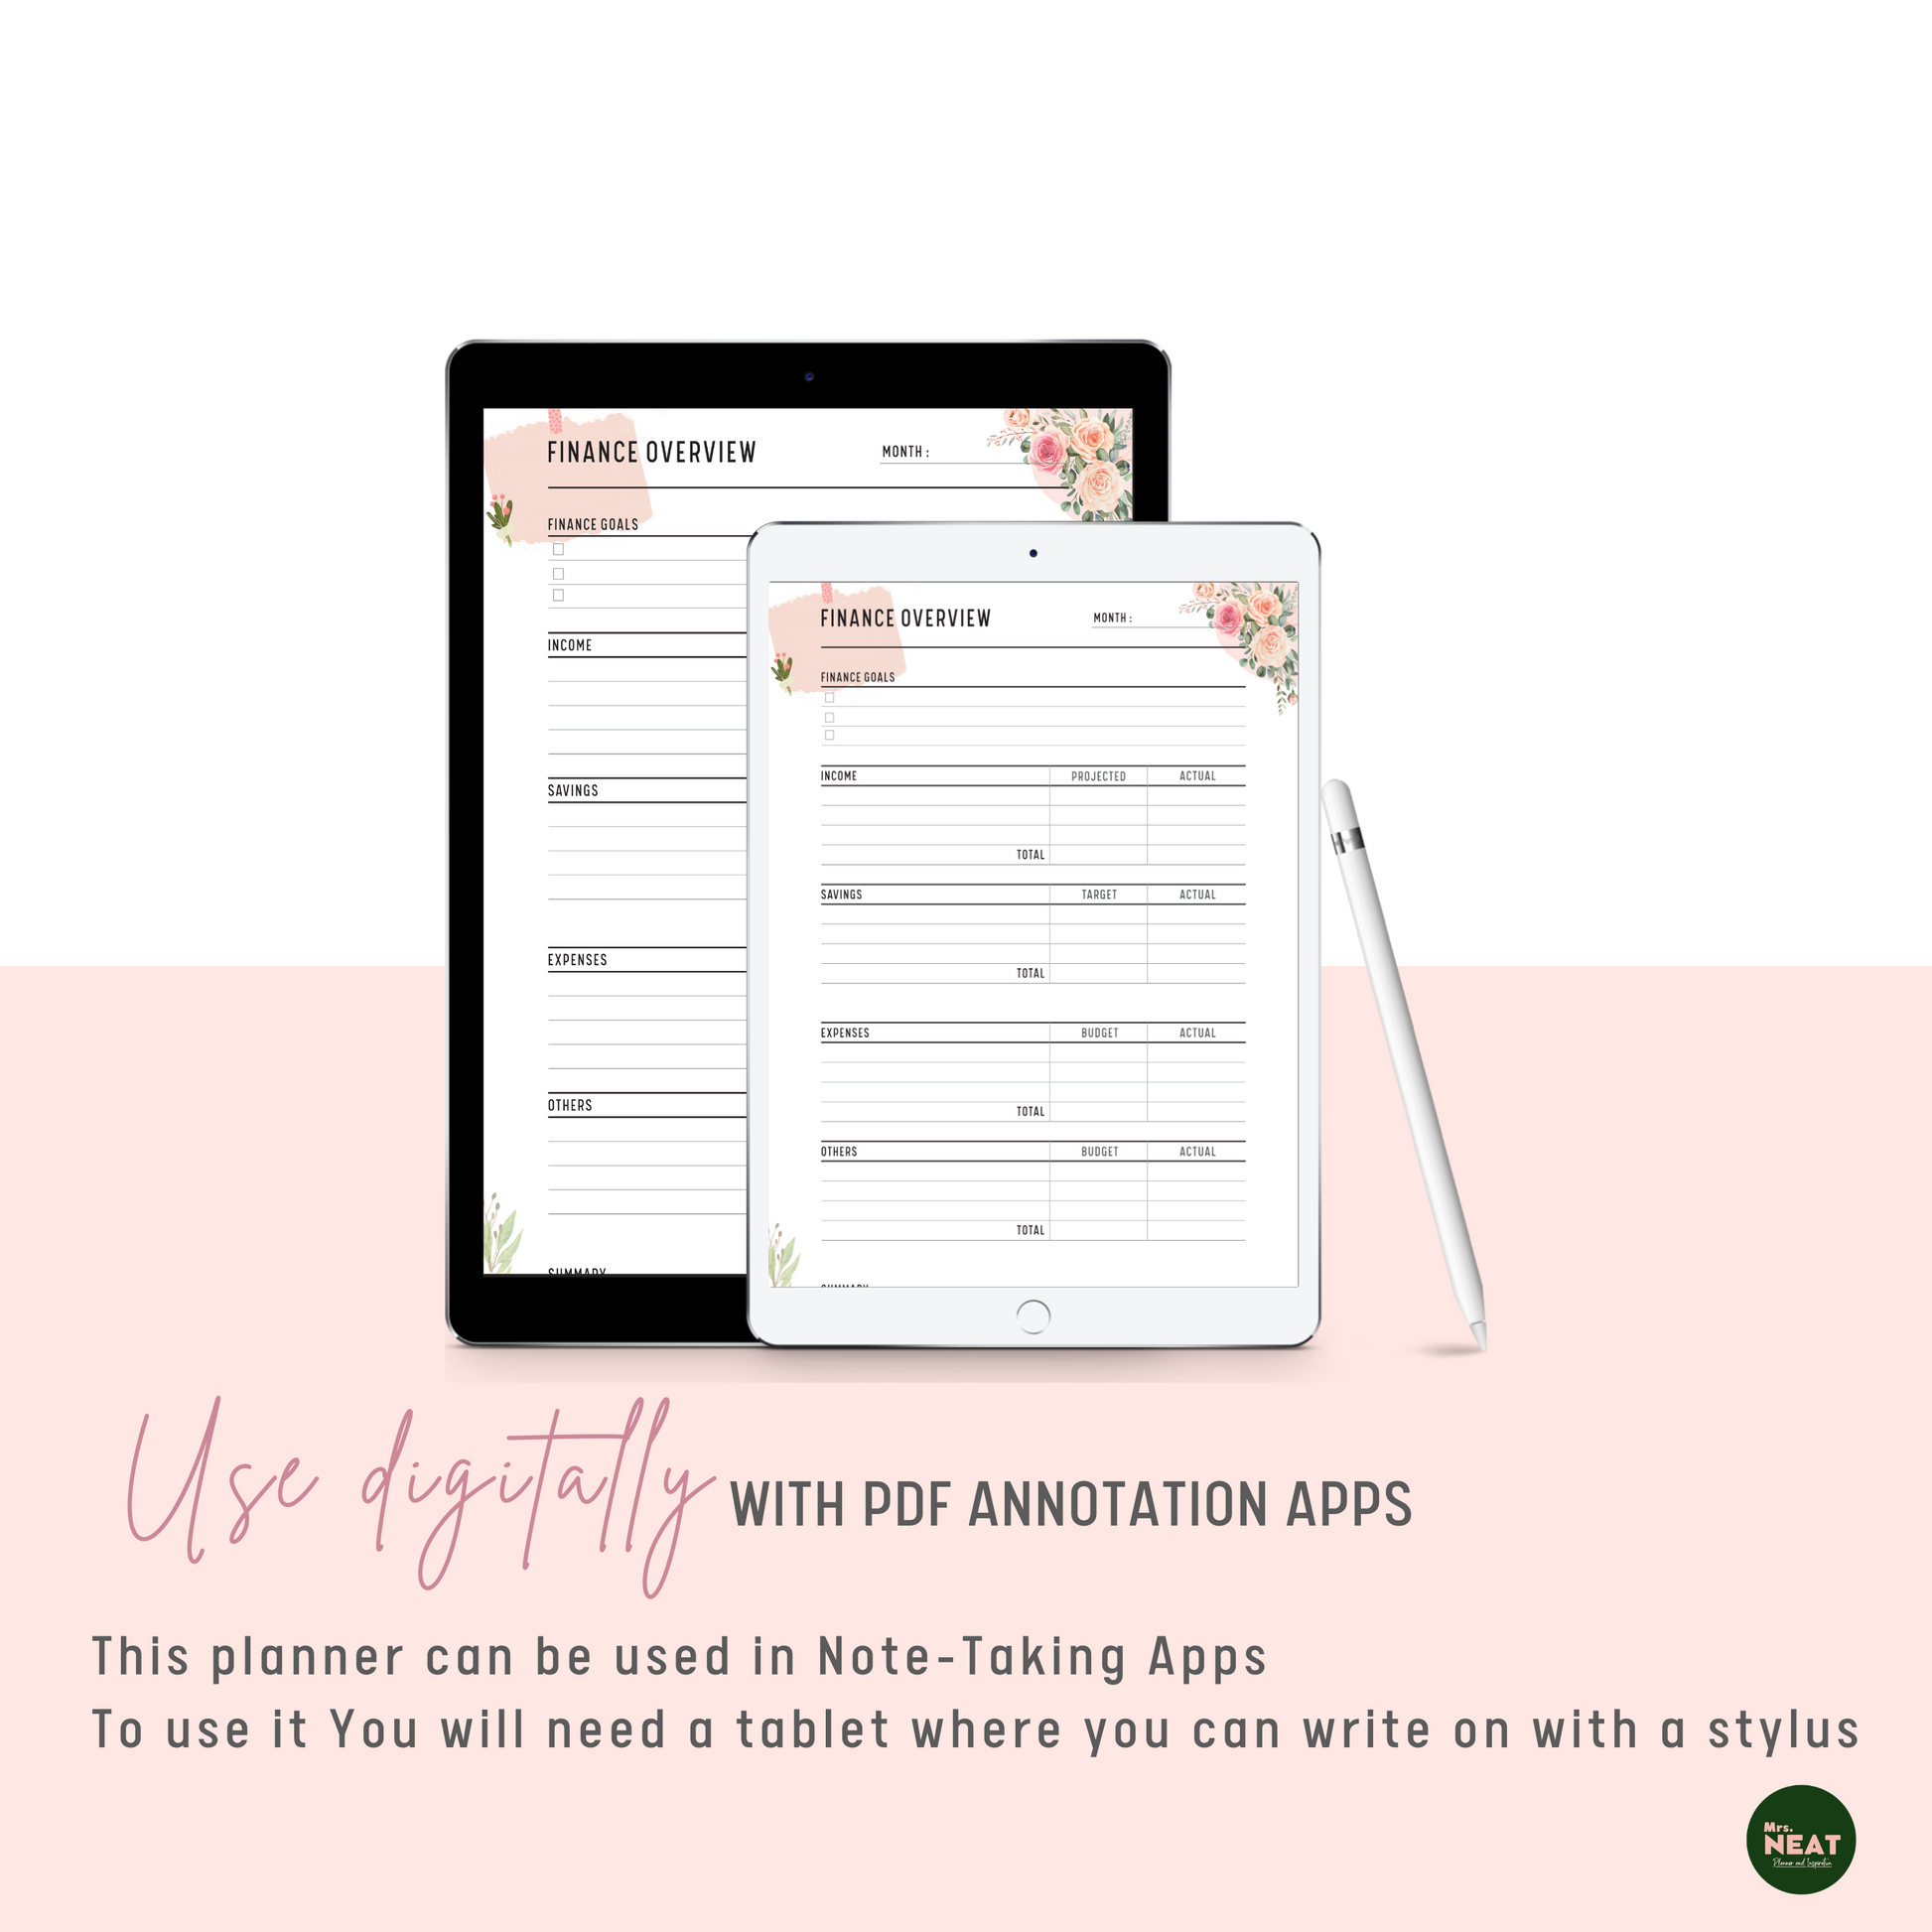 Beautiful Pink Floral Finance Overview use digitally with Tablet and Stylus